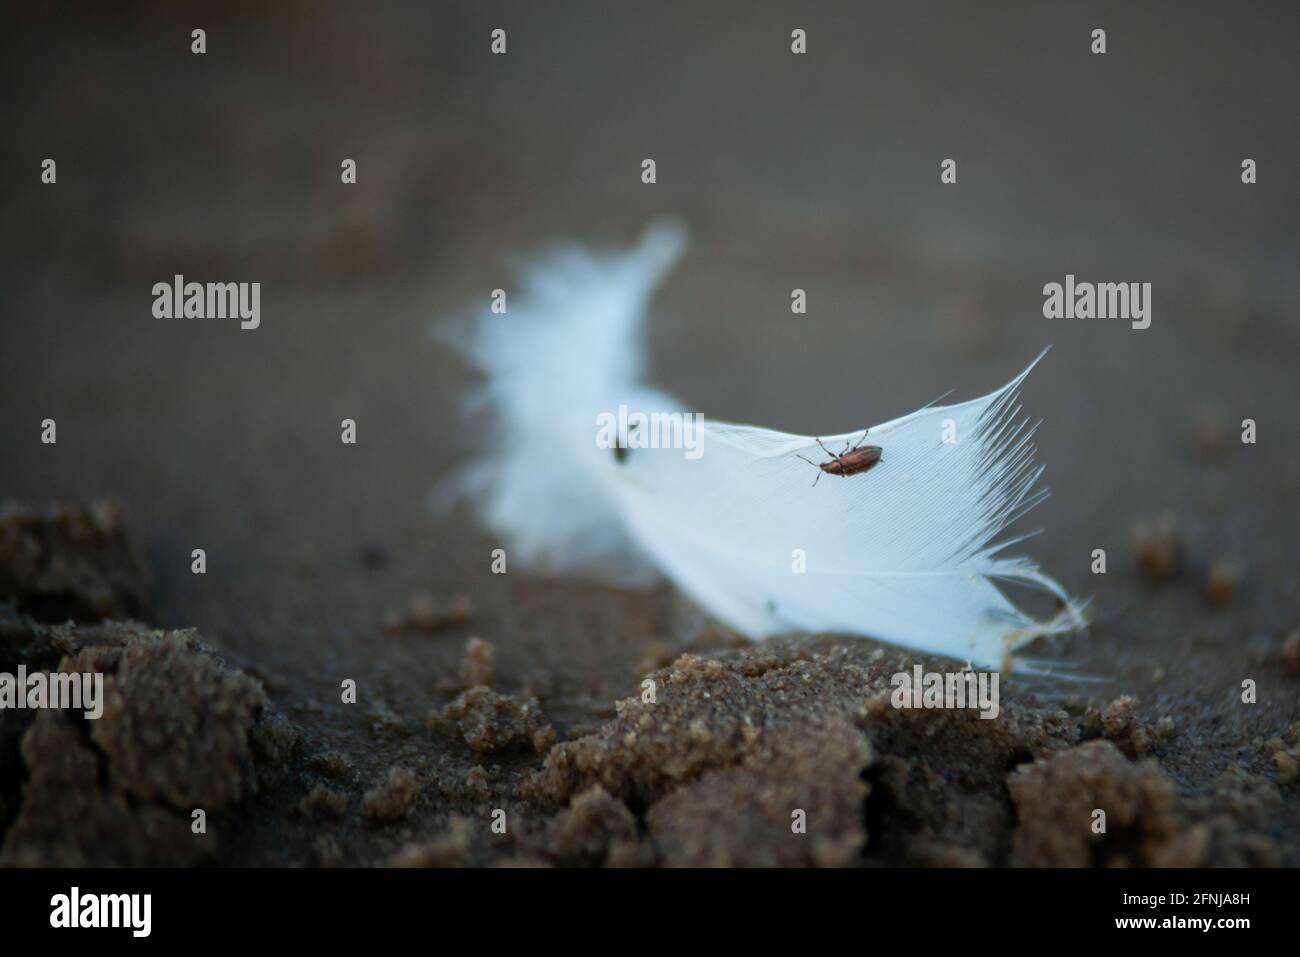 White bird feather in the sea sand with a brown beetle close-up on it. Stock Photo